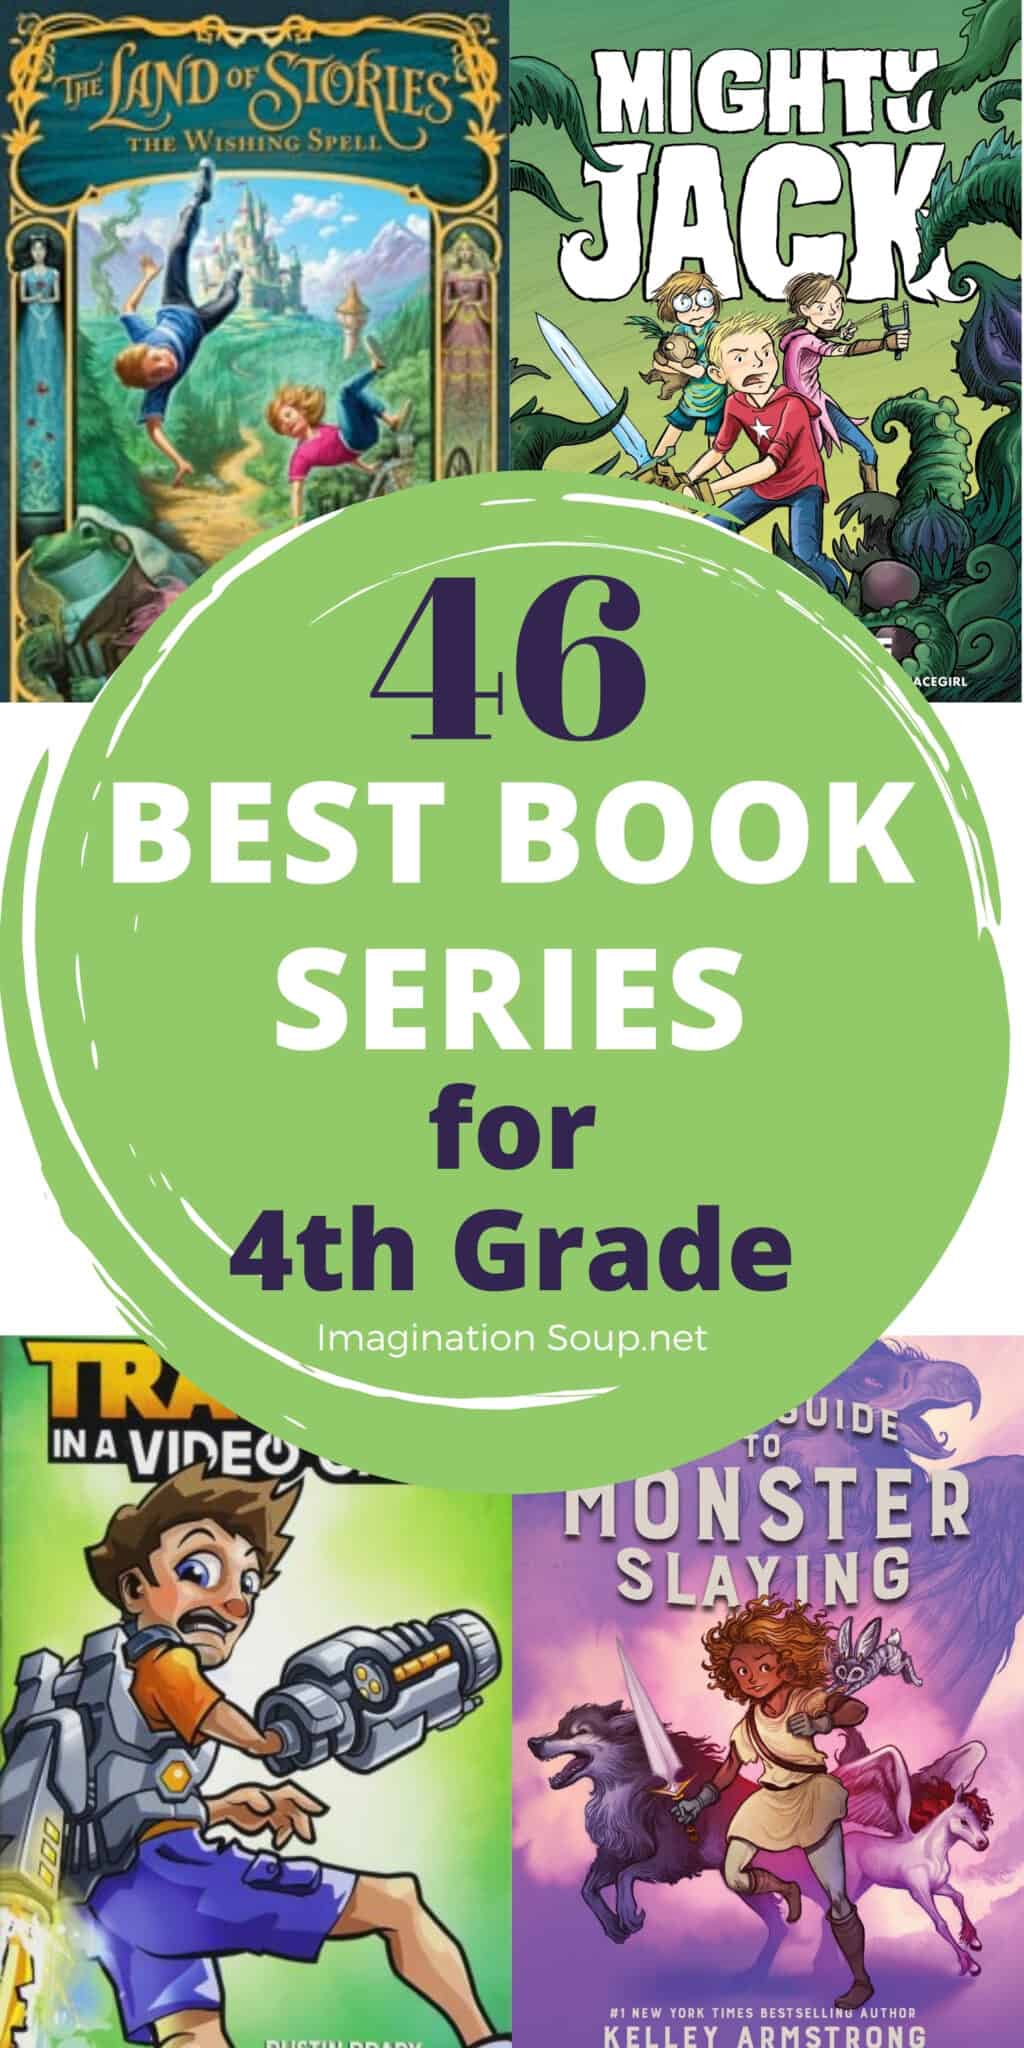 40 Good Book Series for 4th Graders (That Will Keep Them Reading